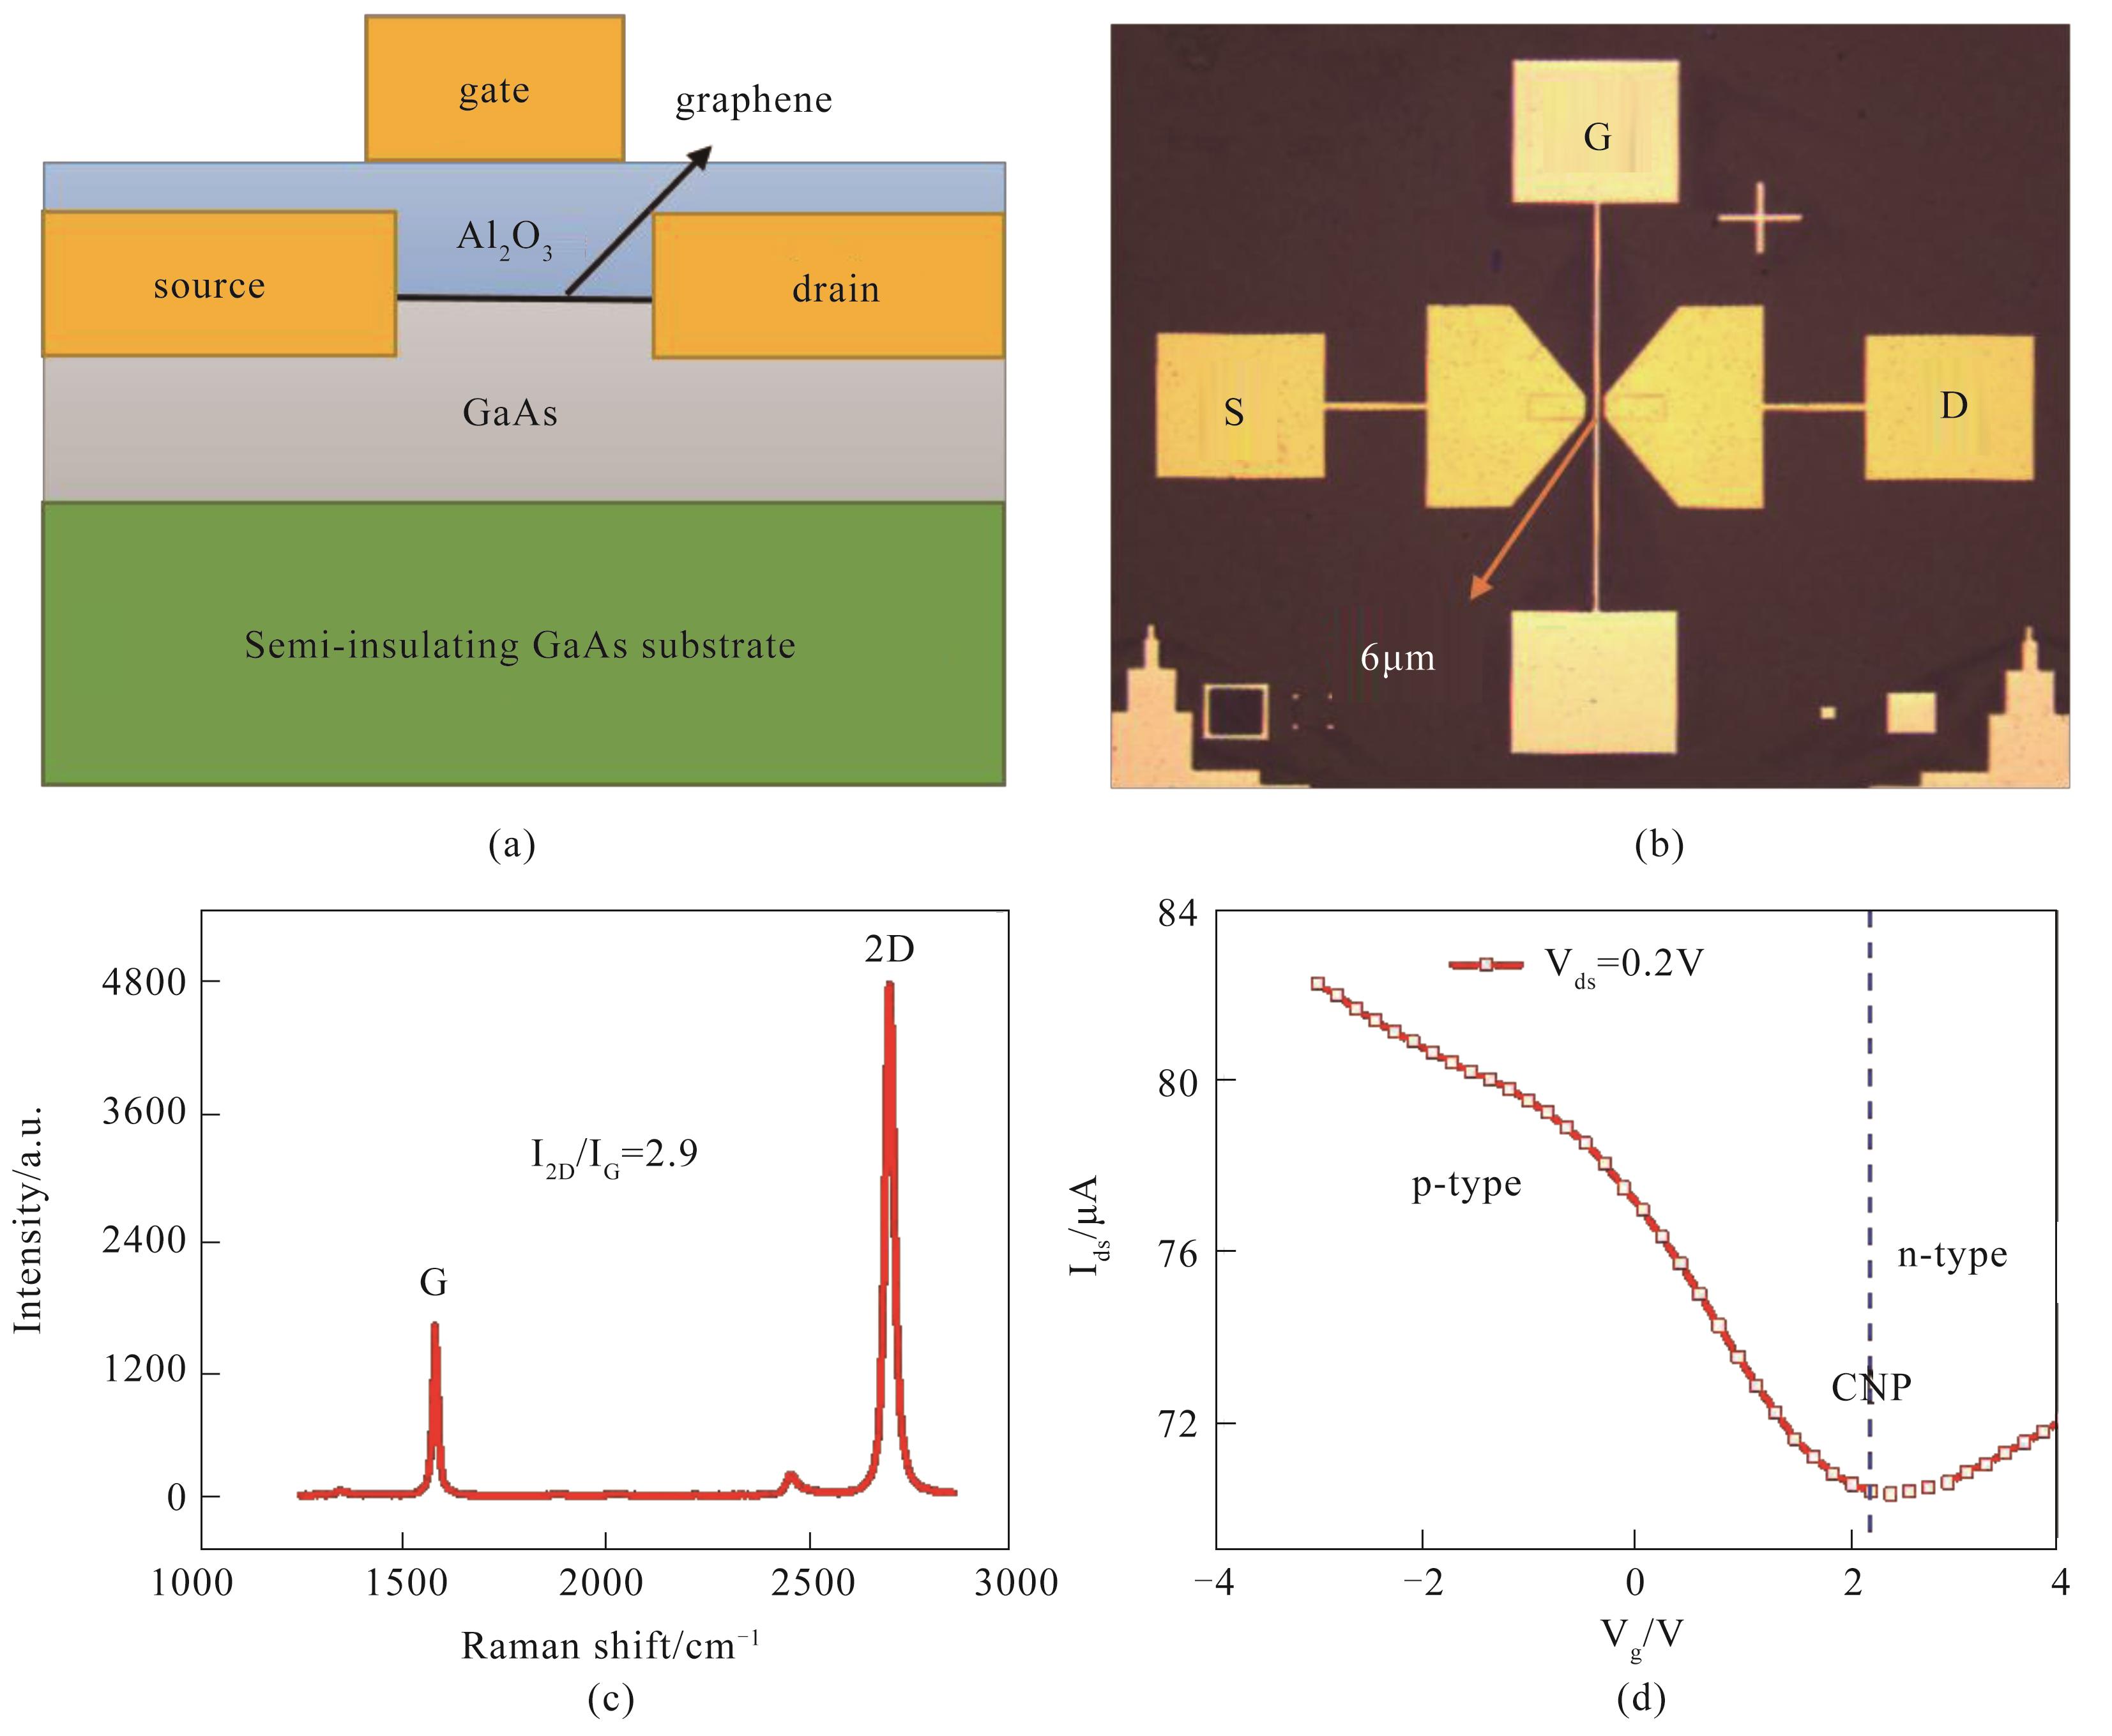 (a) (b) the cross-sectional structural schematic and the corresponding optical top view of the fabricated device (c) Raman spectrum of the monolayer graphene (d) transfer characteristic curve measured with Vds = 0.2V